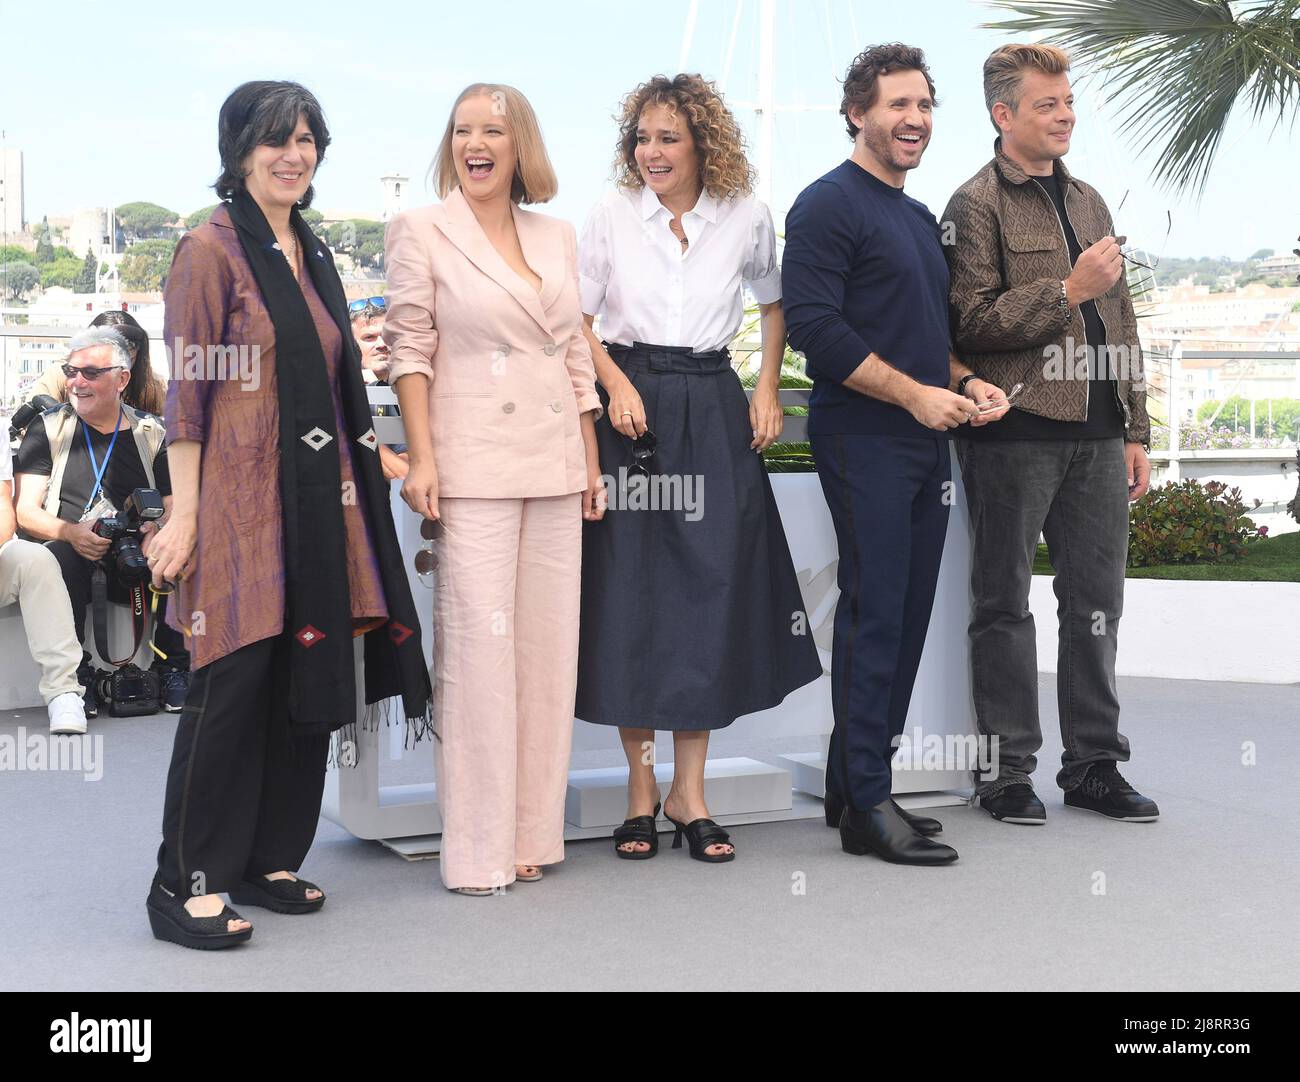 Cannes, France. 18th May, 2022. American director Debra Granik, Polish actress Joanna Kulig, Italian actress Valeria Golino, Venezuelean actor Edgar Ramirez and French singer Benjamin Biolay, attend the Un Certain Regard jury photo call at Palais des Festivals at the 75th Cannes Film Festival, France on Wednesday, May 18, 2022. Photo by Rune Hellestad/ Credit: UPI/Alamy Live News Stock Photo